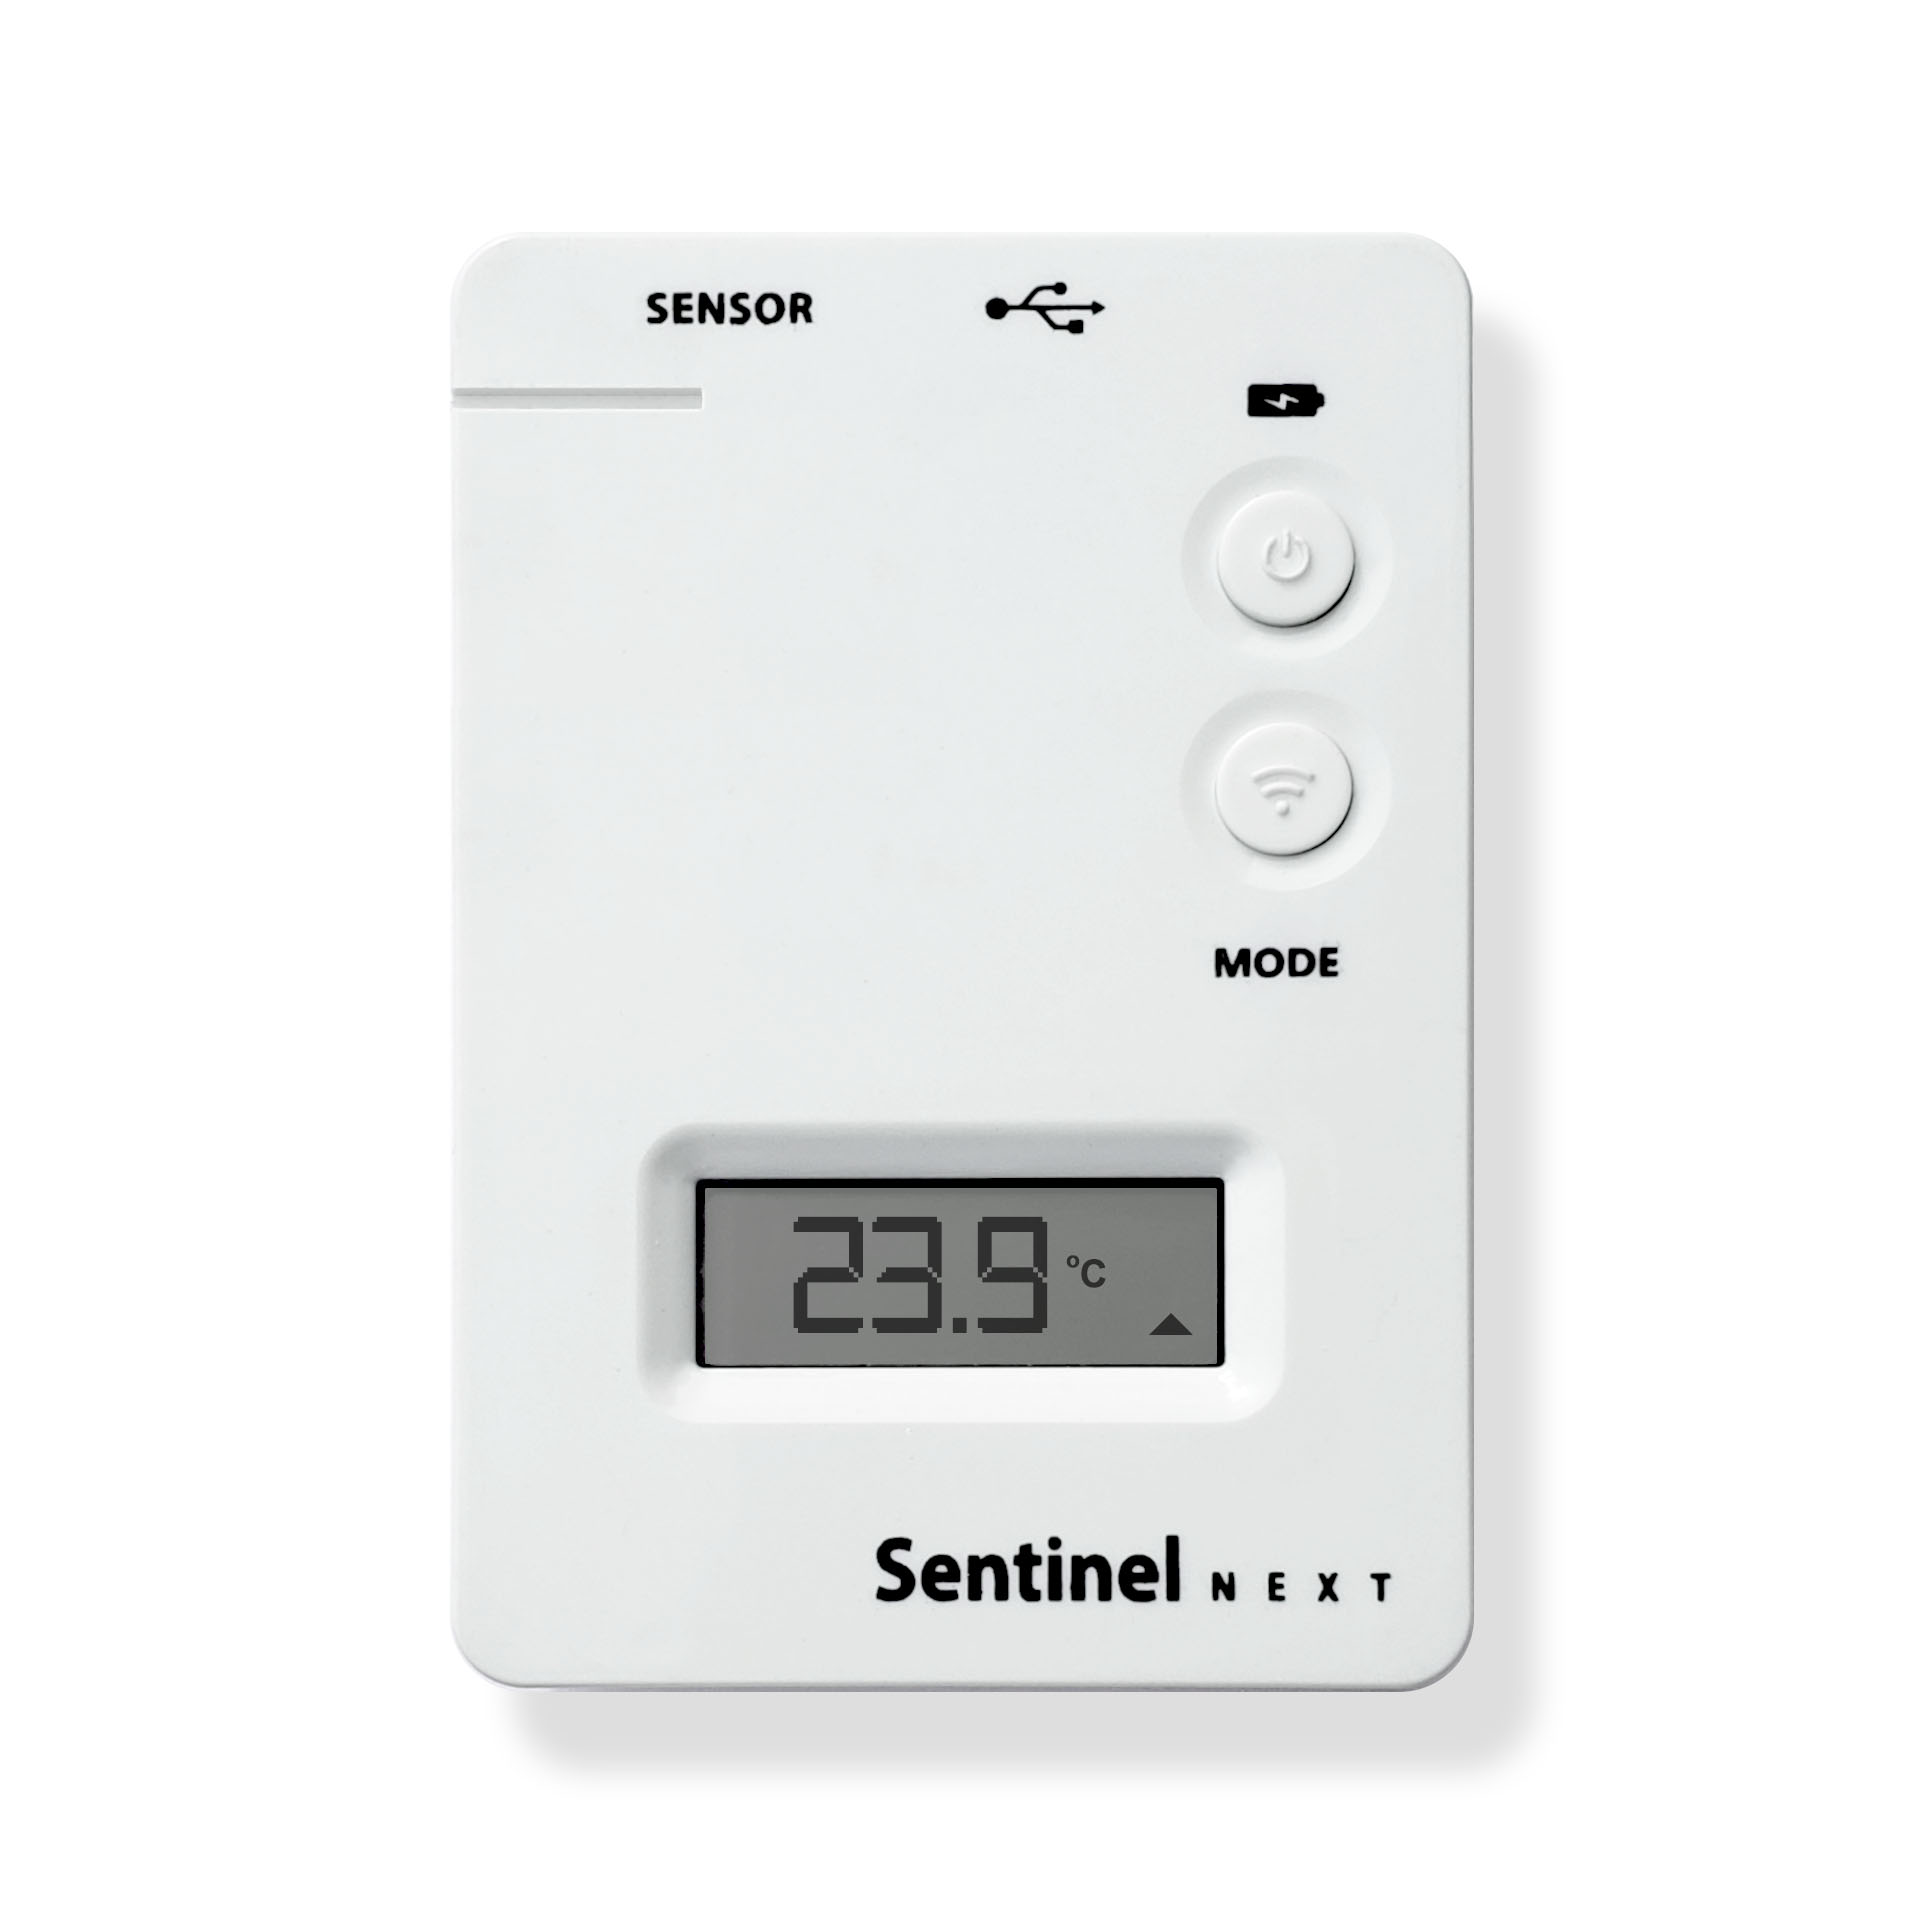 Remote Alarms for Ultra-Low Temperature Freezers